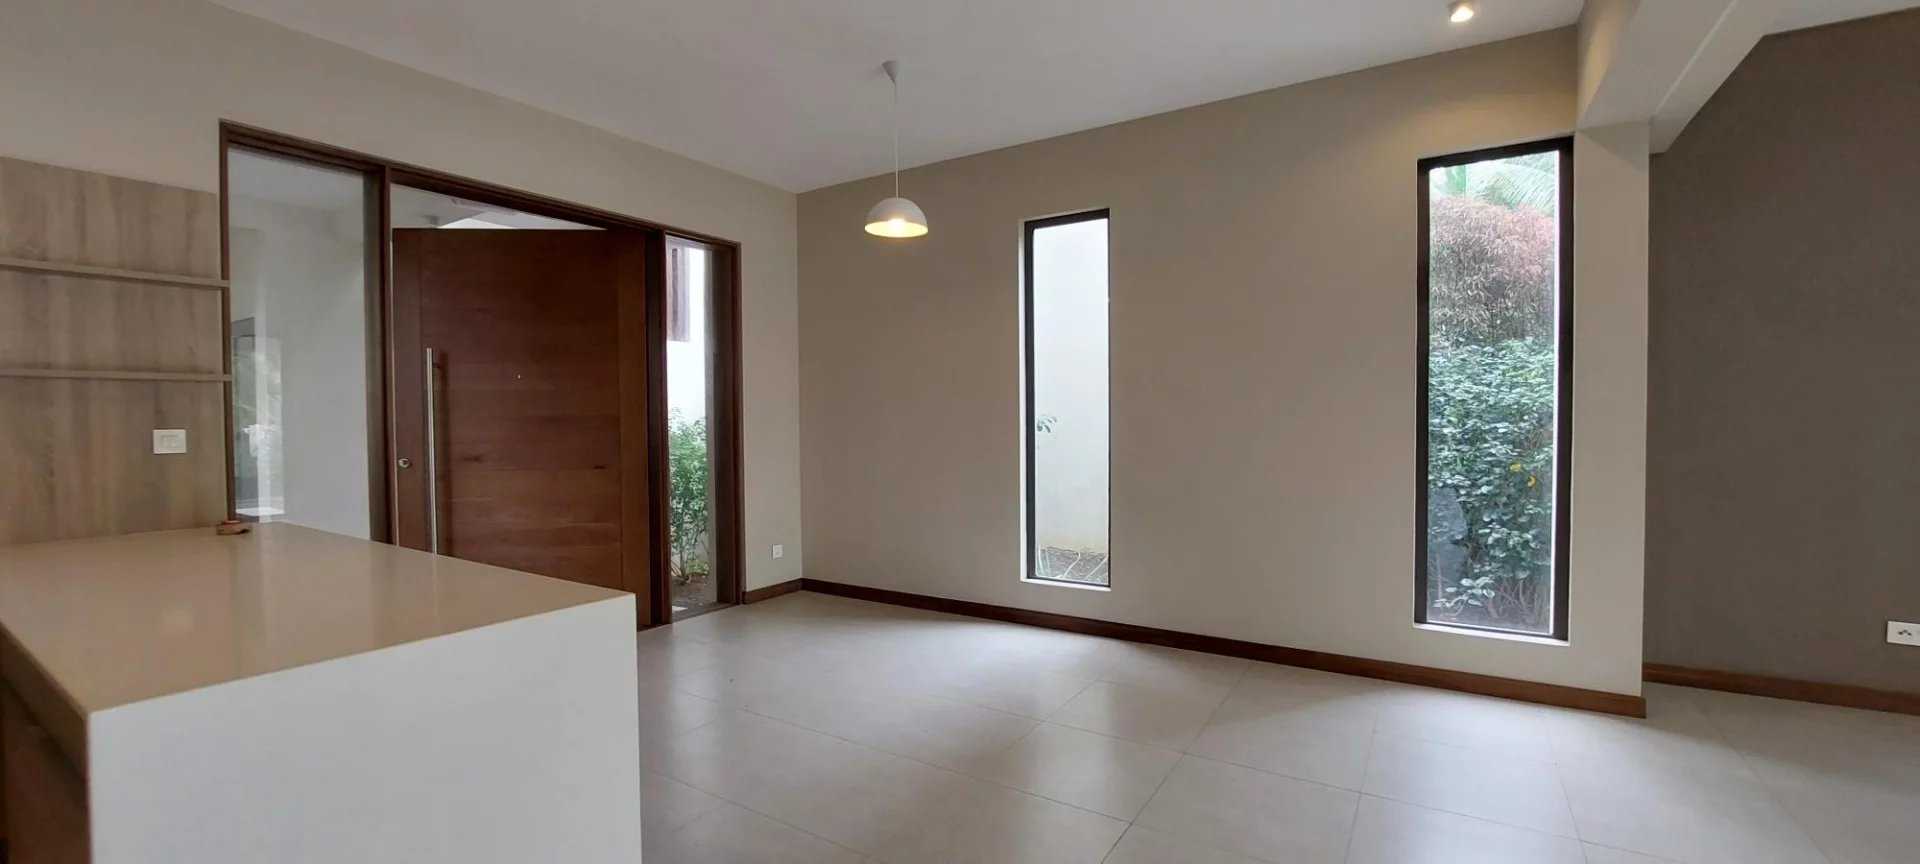 Piso Grand Baie  -  ref 82632094 (picture 1)